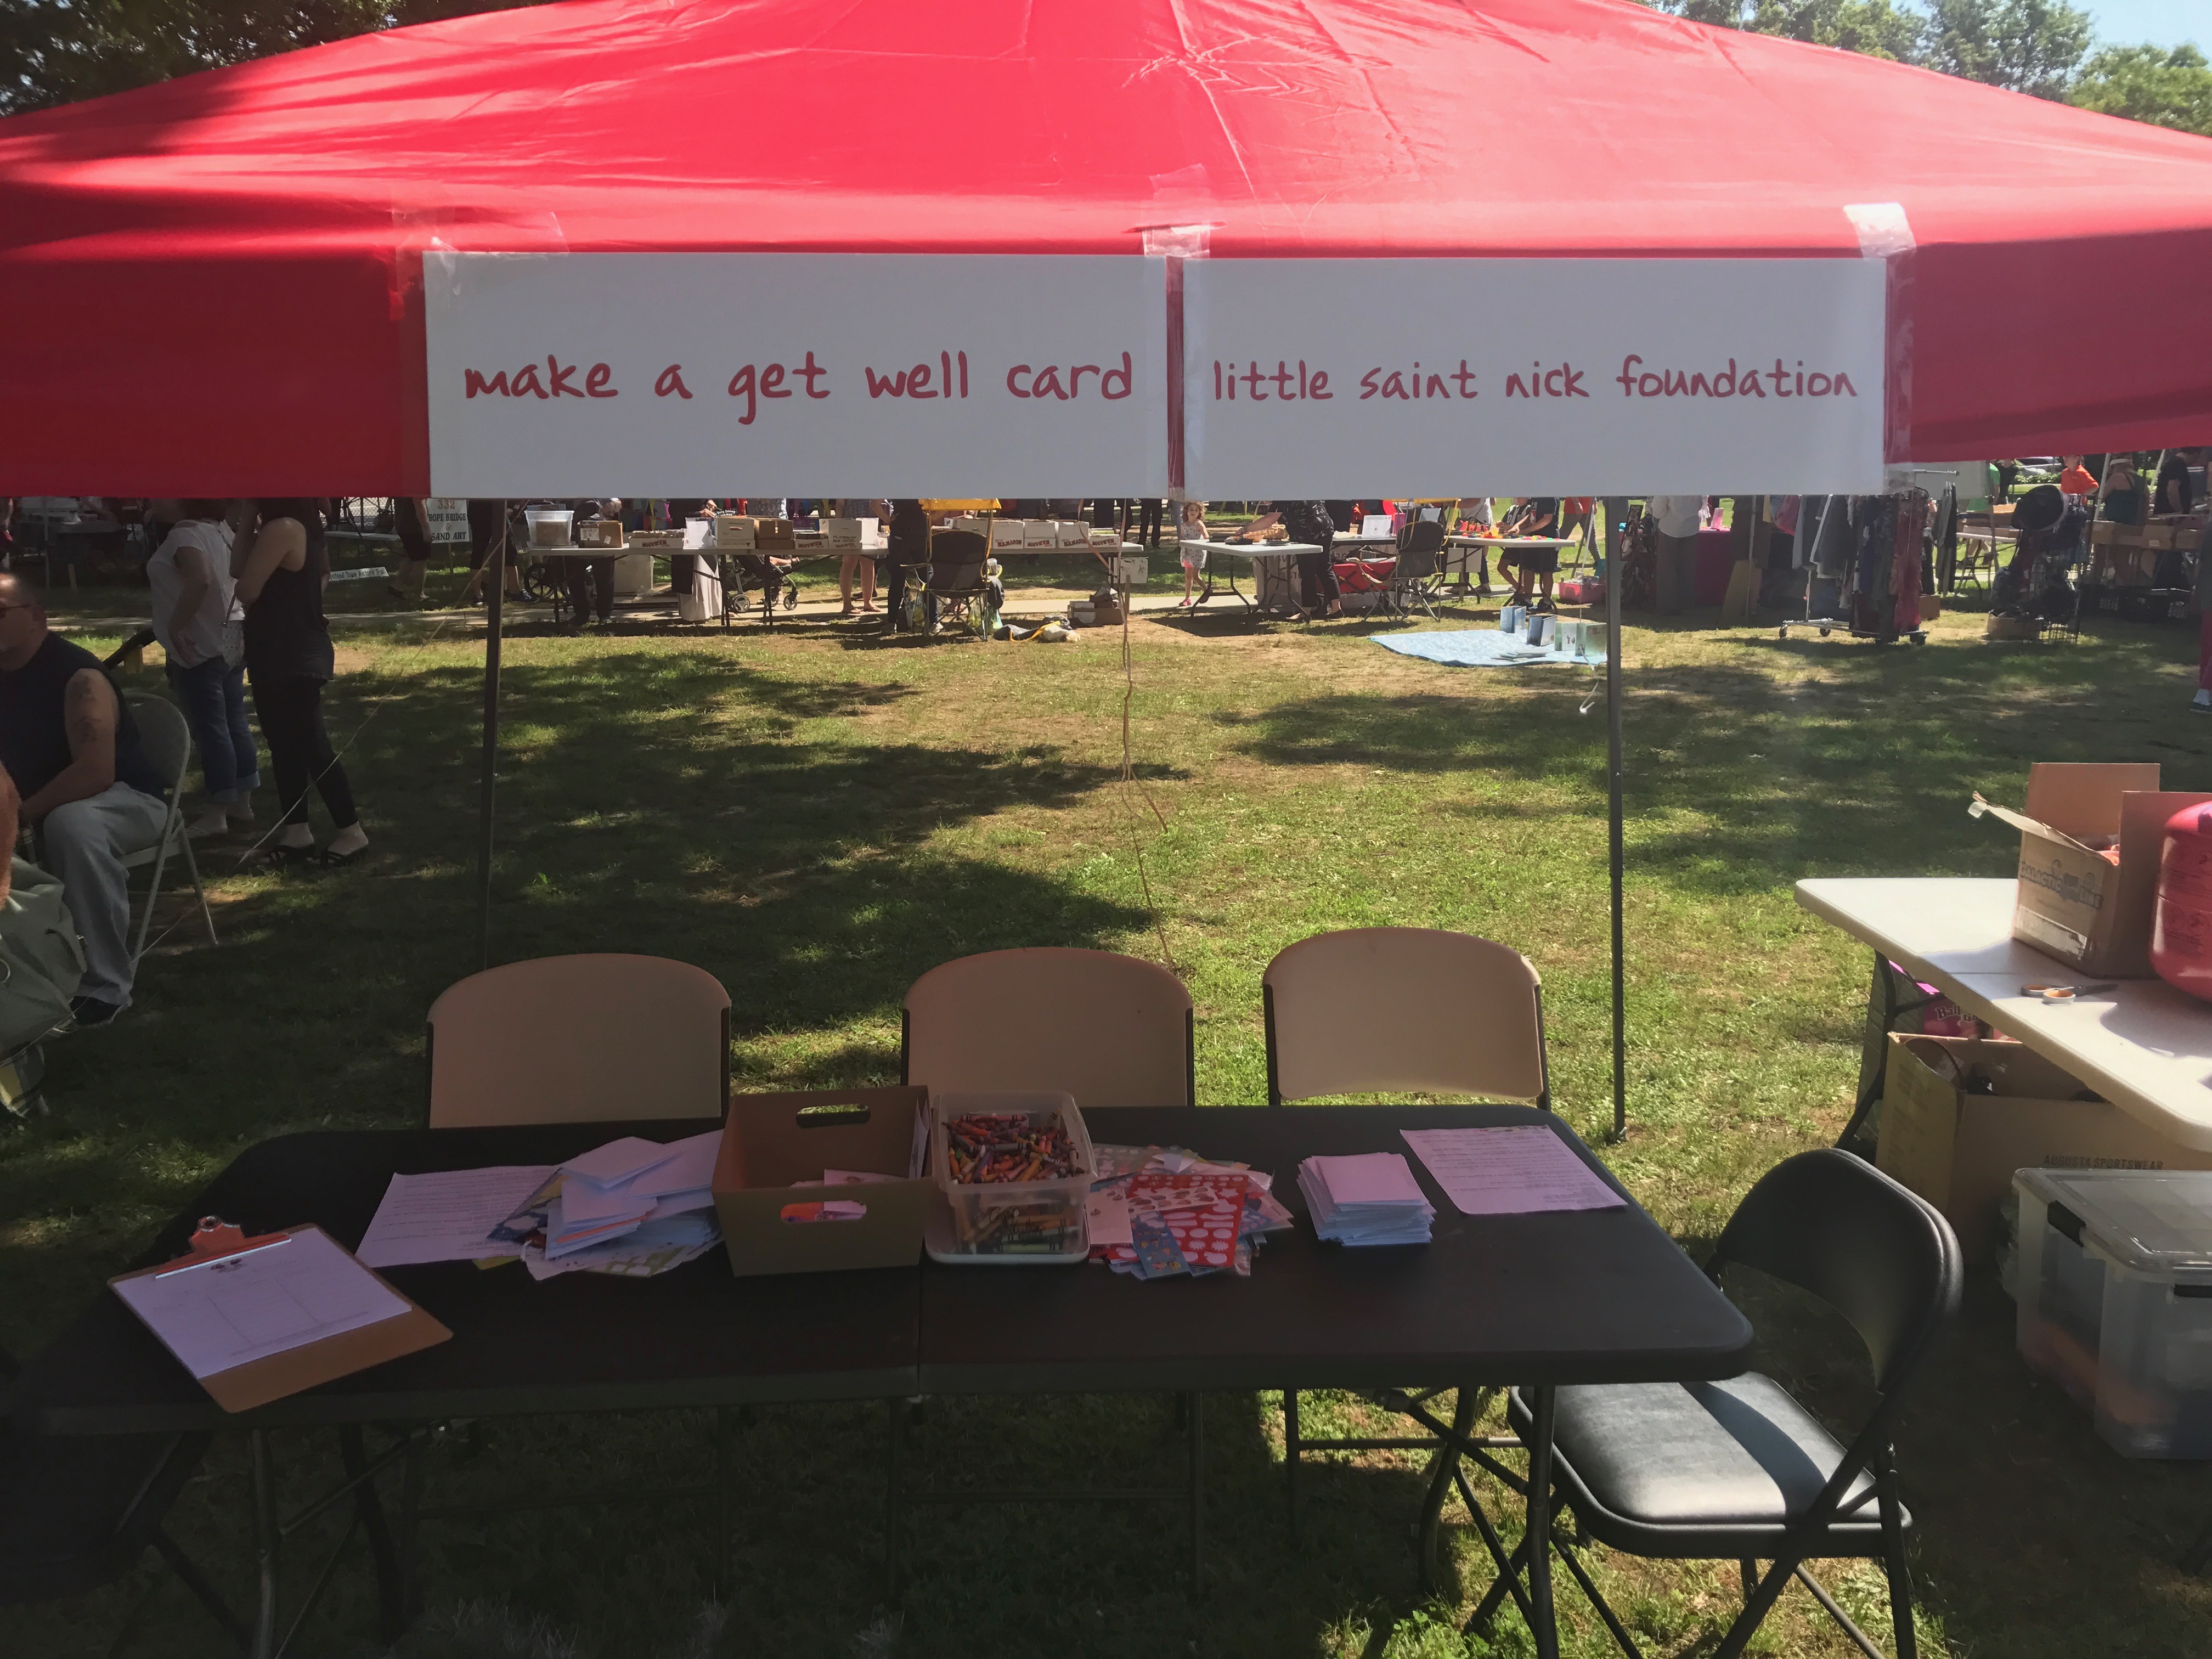 Huckleberry Frolic Get Well Card Making Event